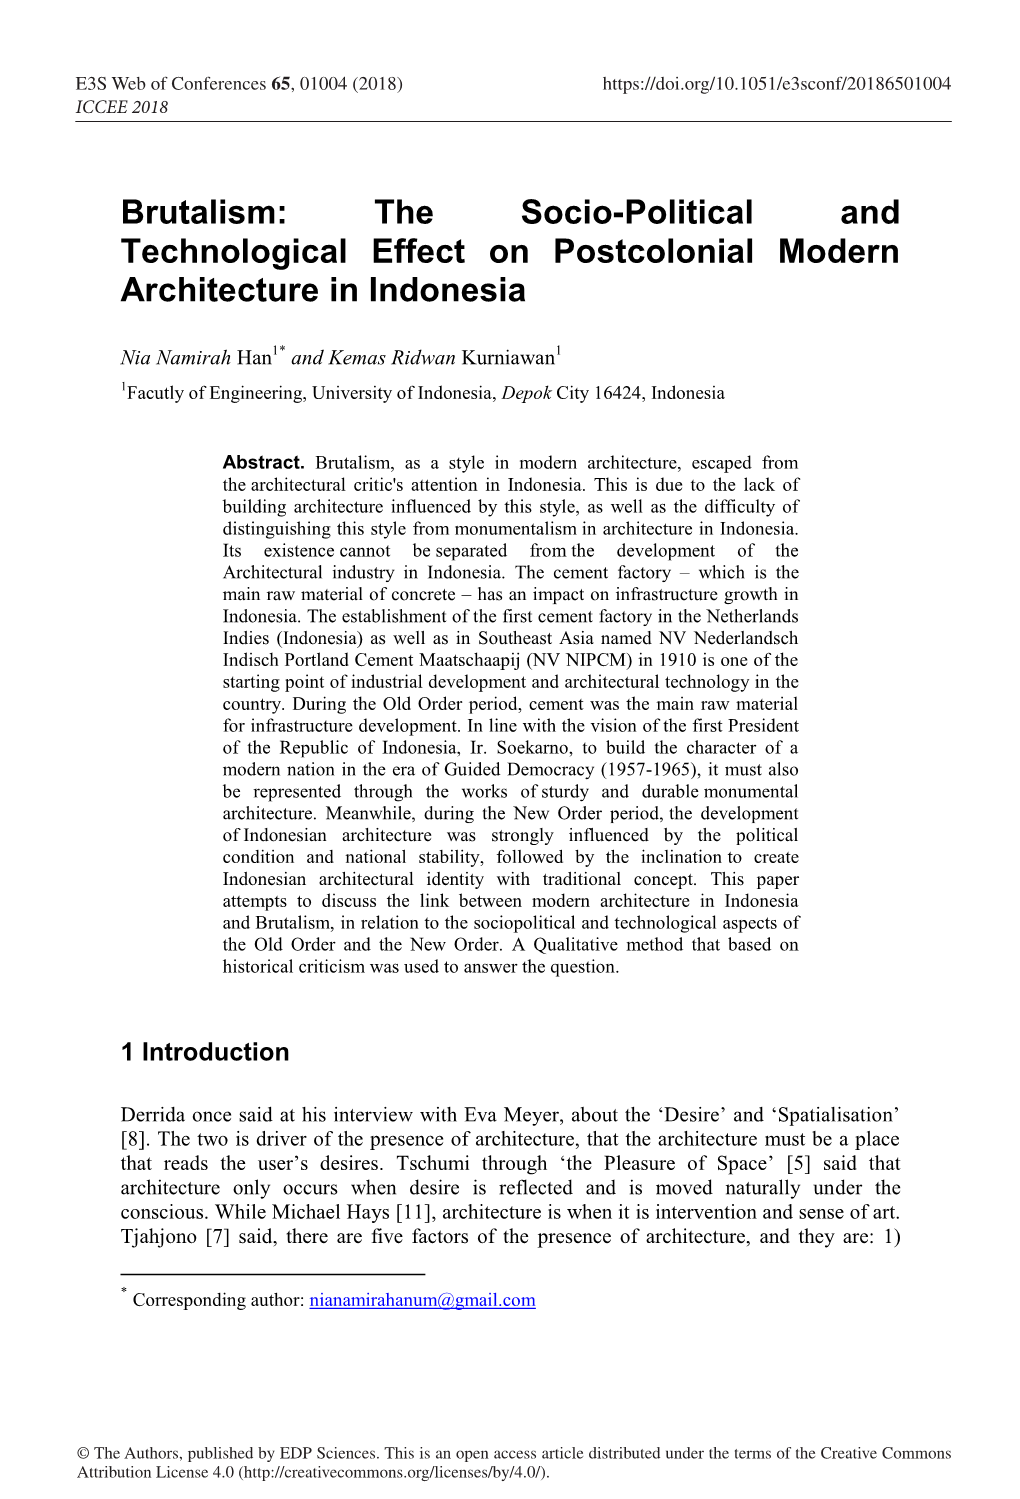 Brutalism: the Socio-Political and Technological Effect on Postcolonial Modern Architecture in Indonesia